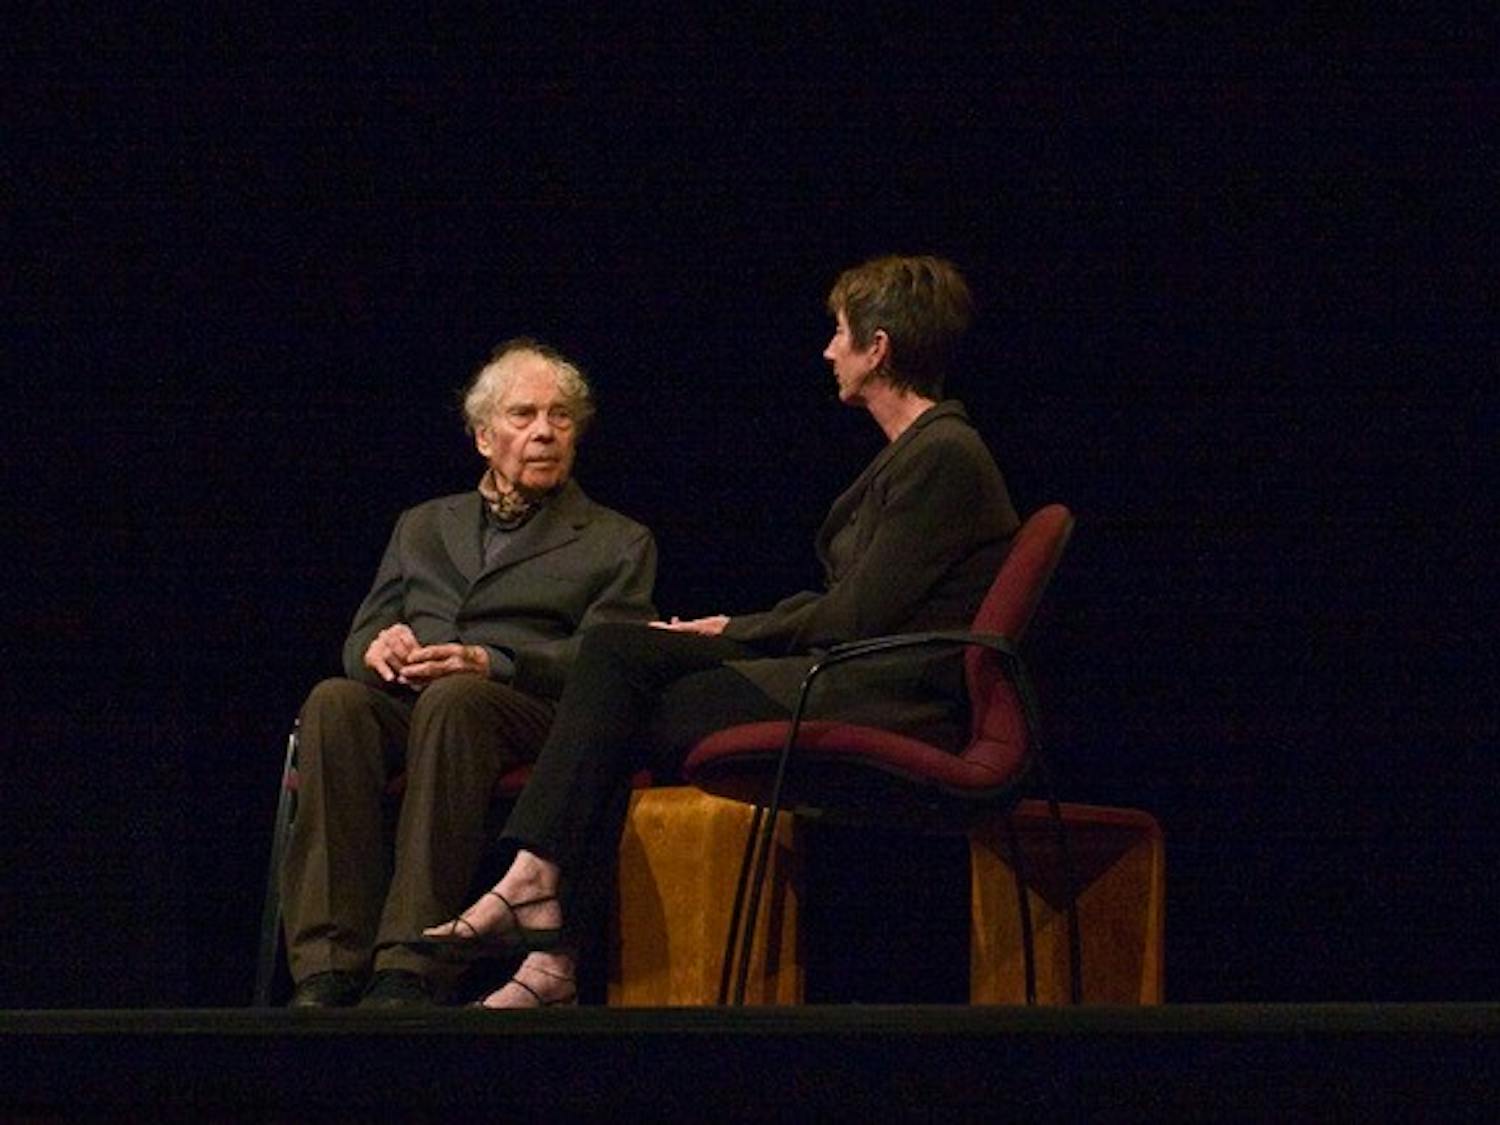 Noted choreographer Merce Cunningham, 88, provided an intimate glimpse into his life and work Wednesday night at Moore Theater.